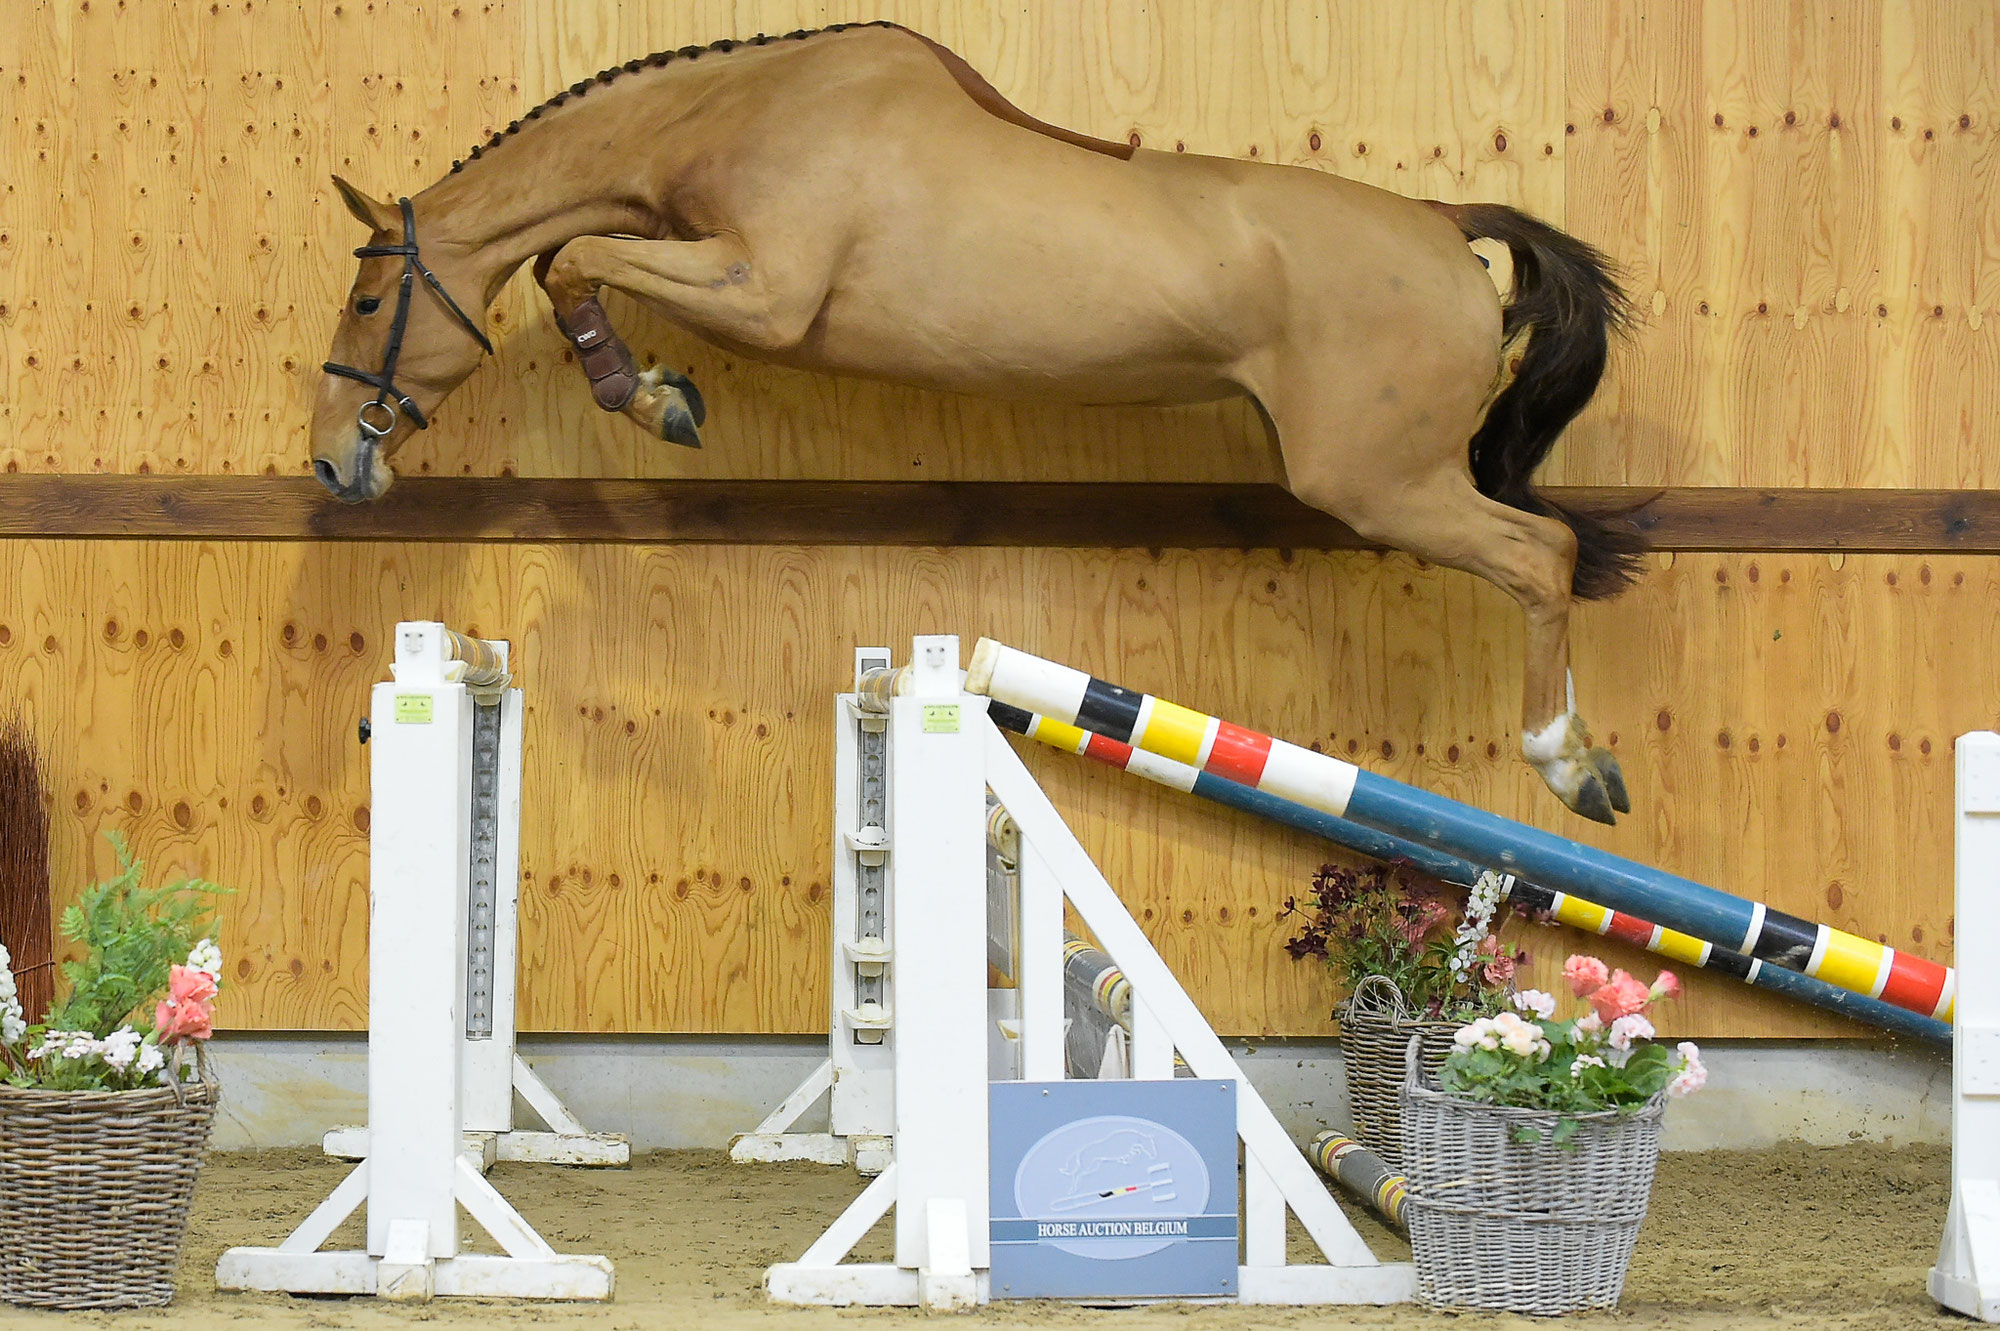 How to prepare your showjumping horse for an auction?